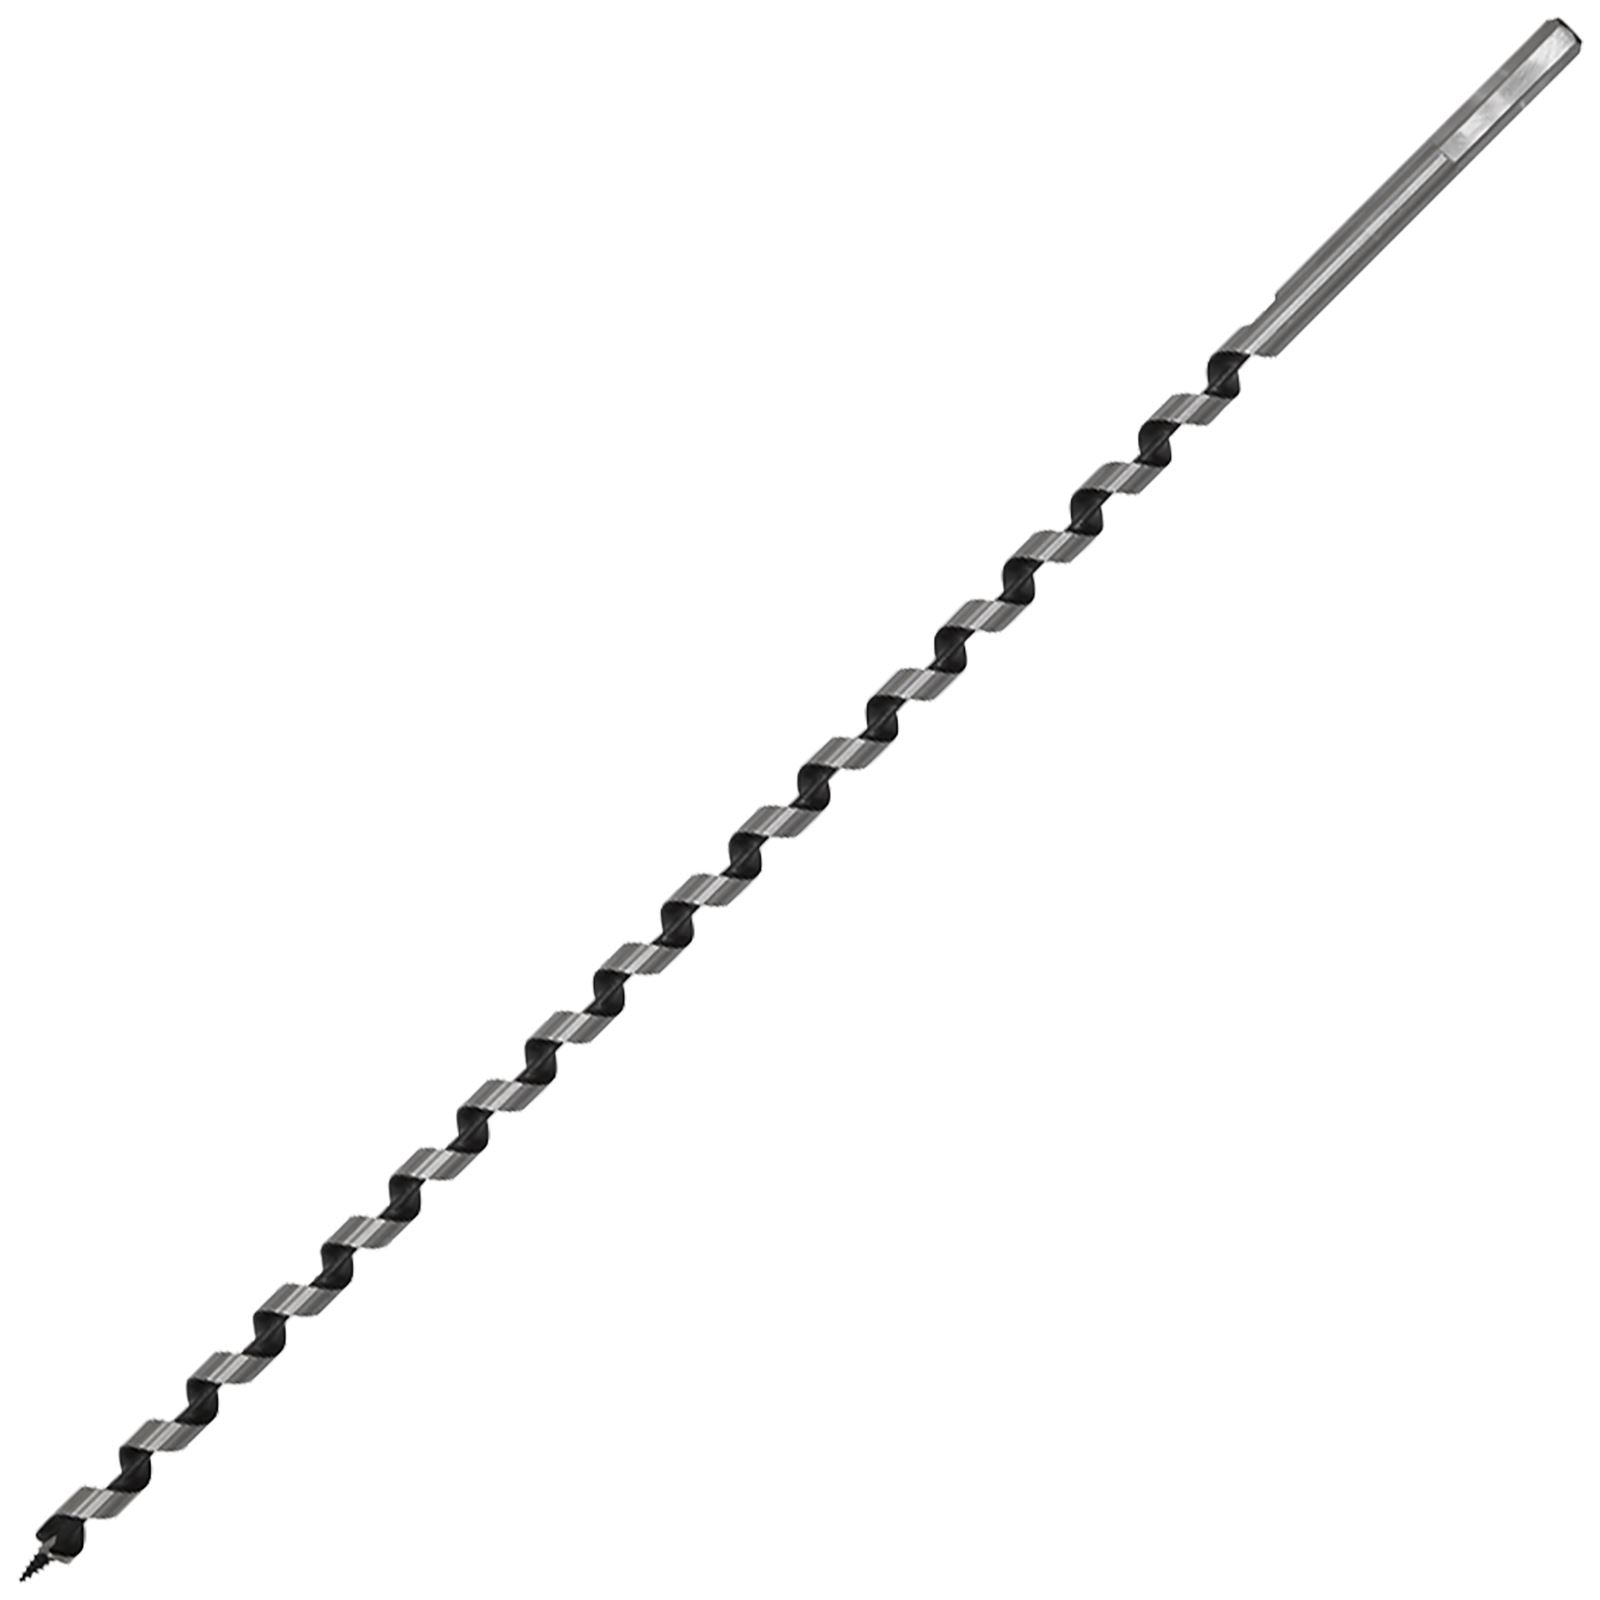 Worksafe by Sealey Auger Wood Drill Bit 13mm x 460mm